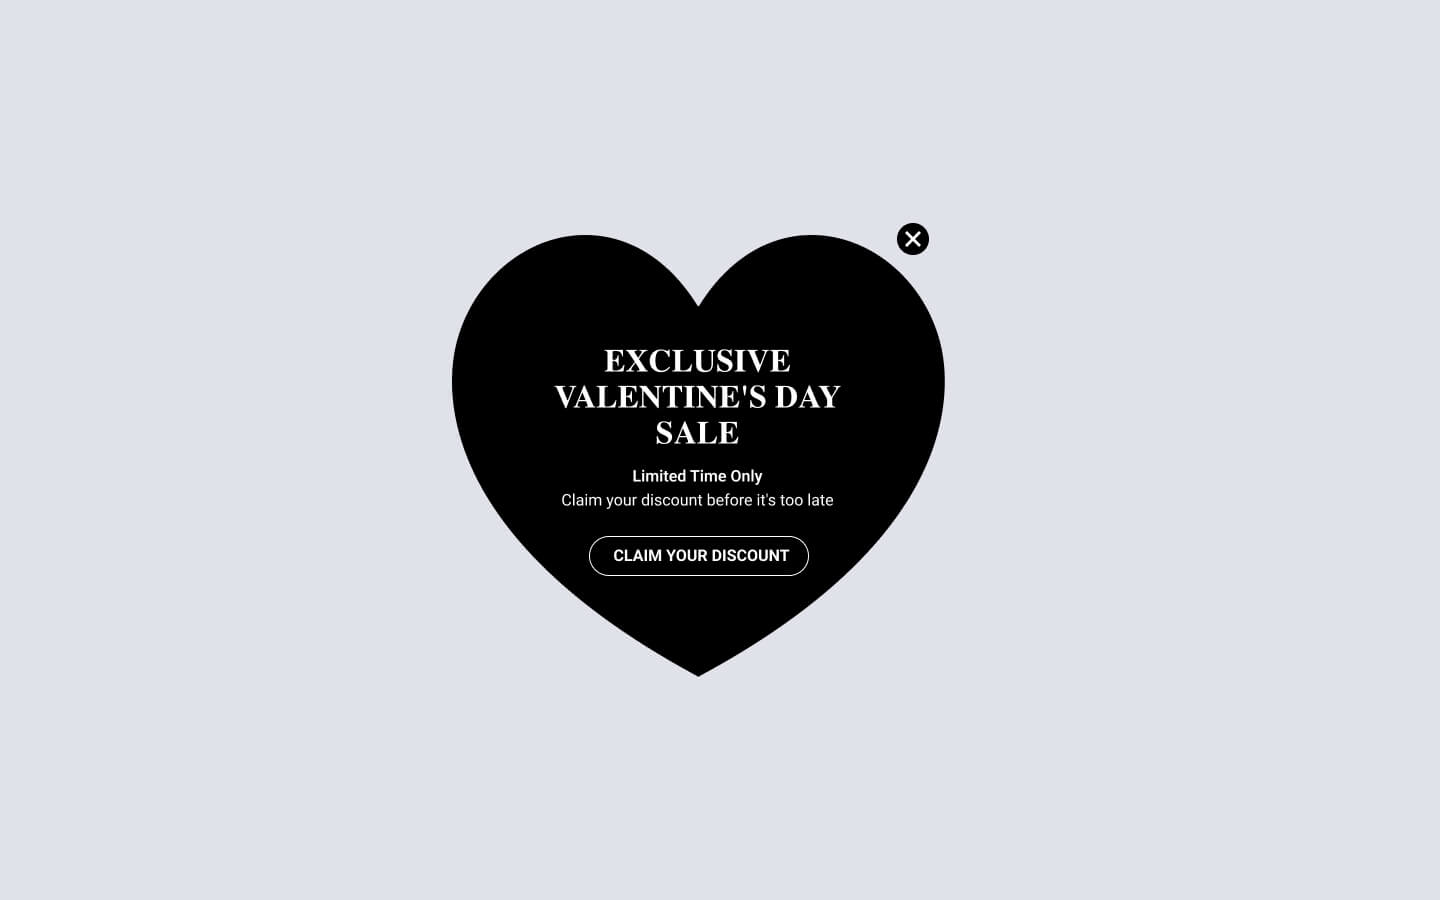 Promote Valentine’s Day Sale with a Heart-Shaped Popup Banner